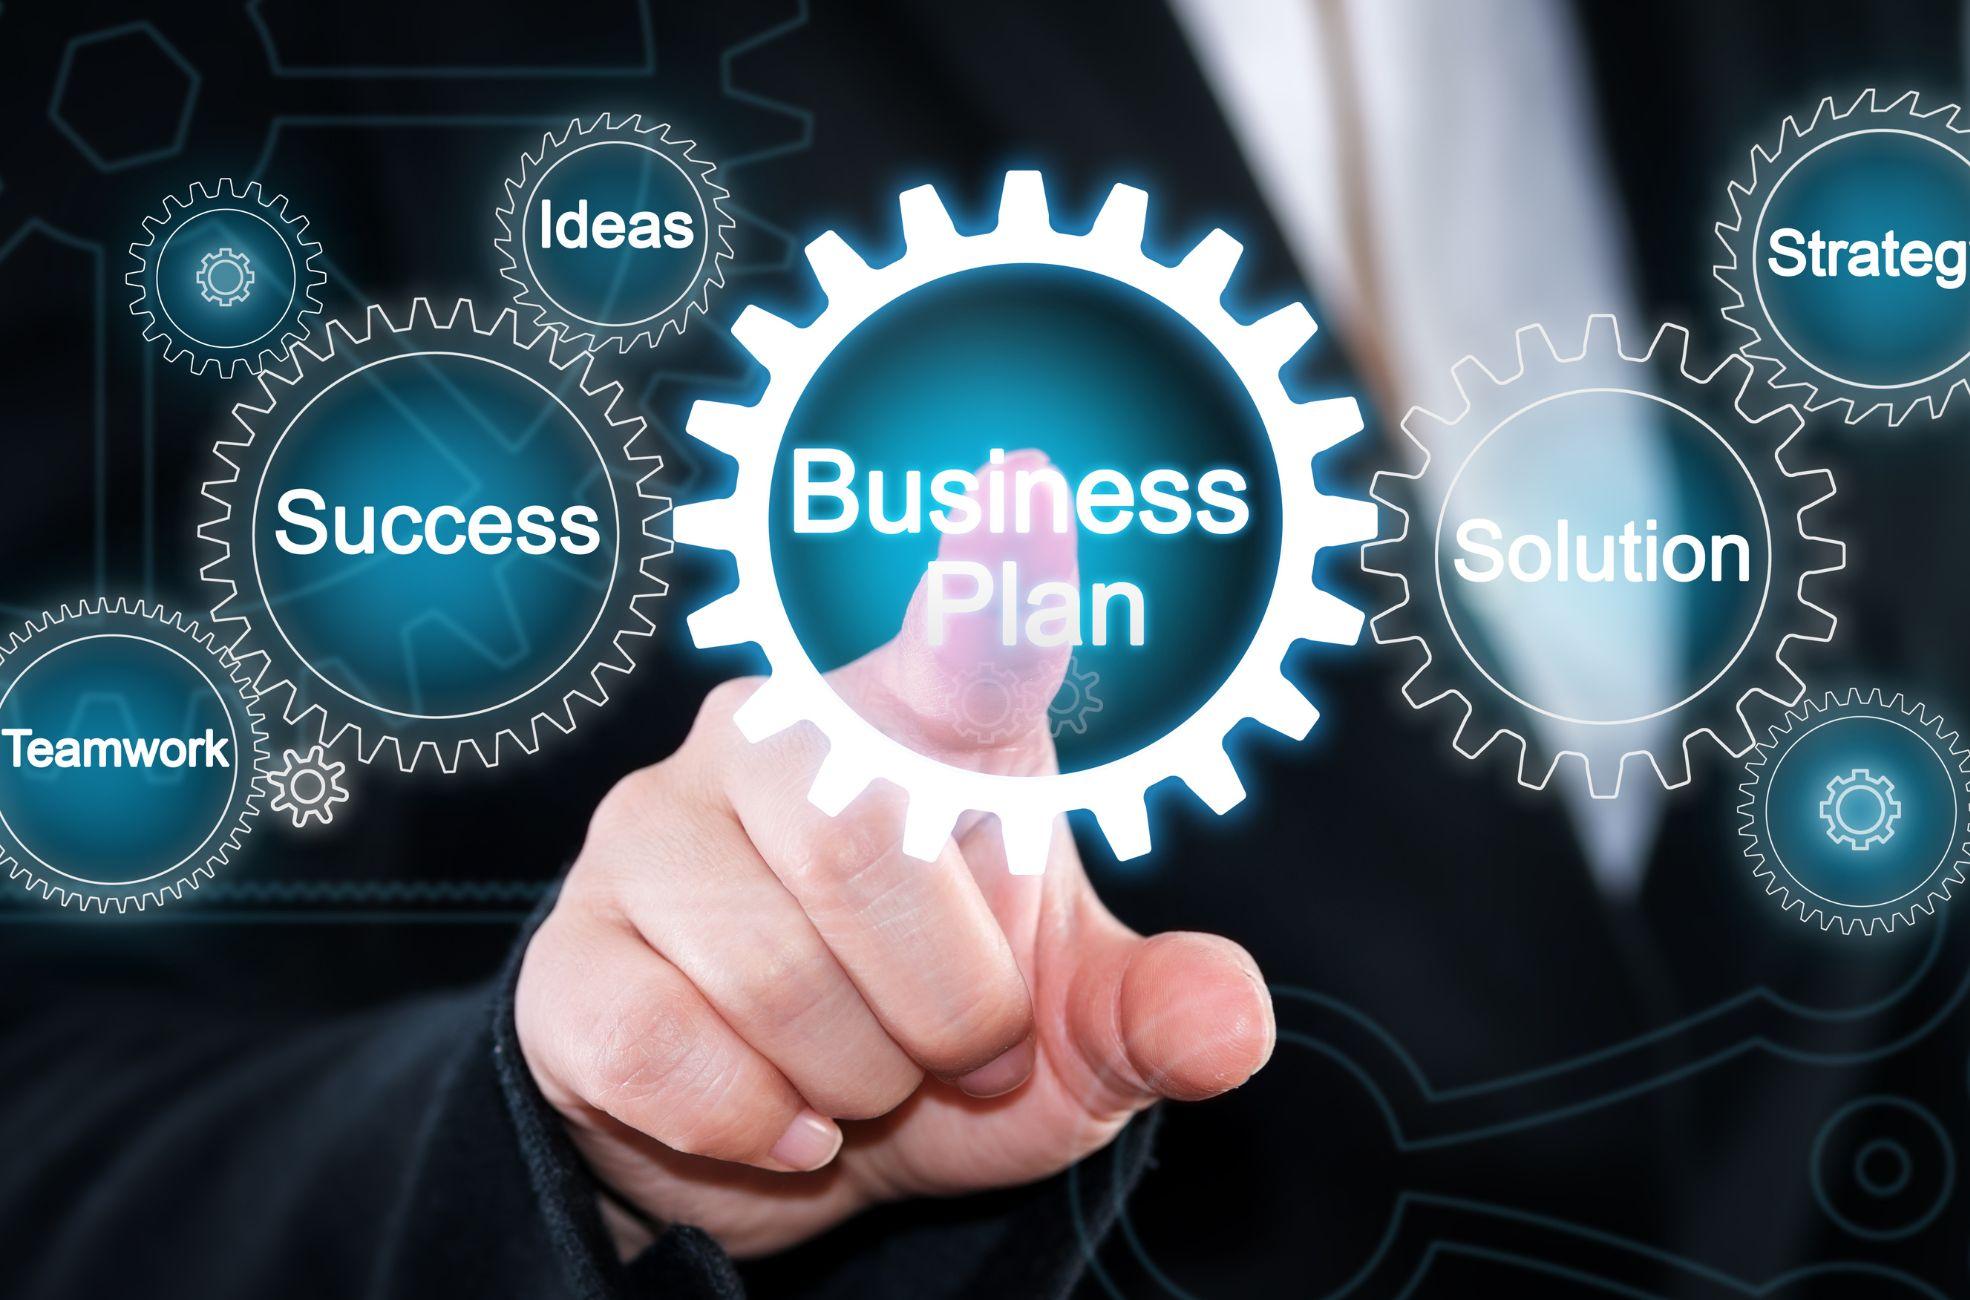 How To Write A Business Plan: Our Step-by-Step Guide